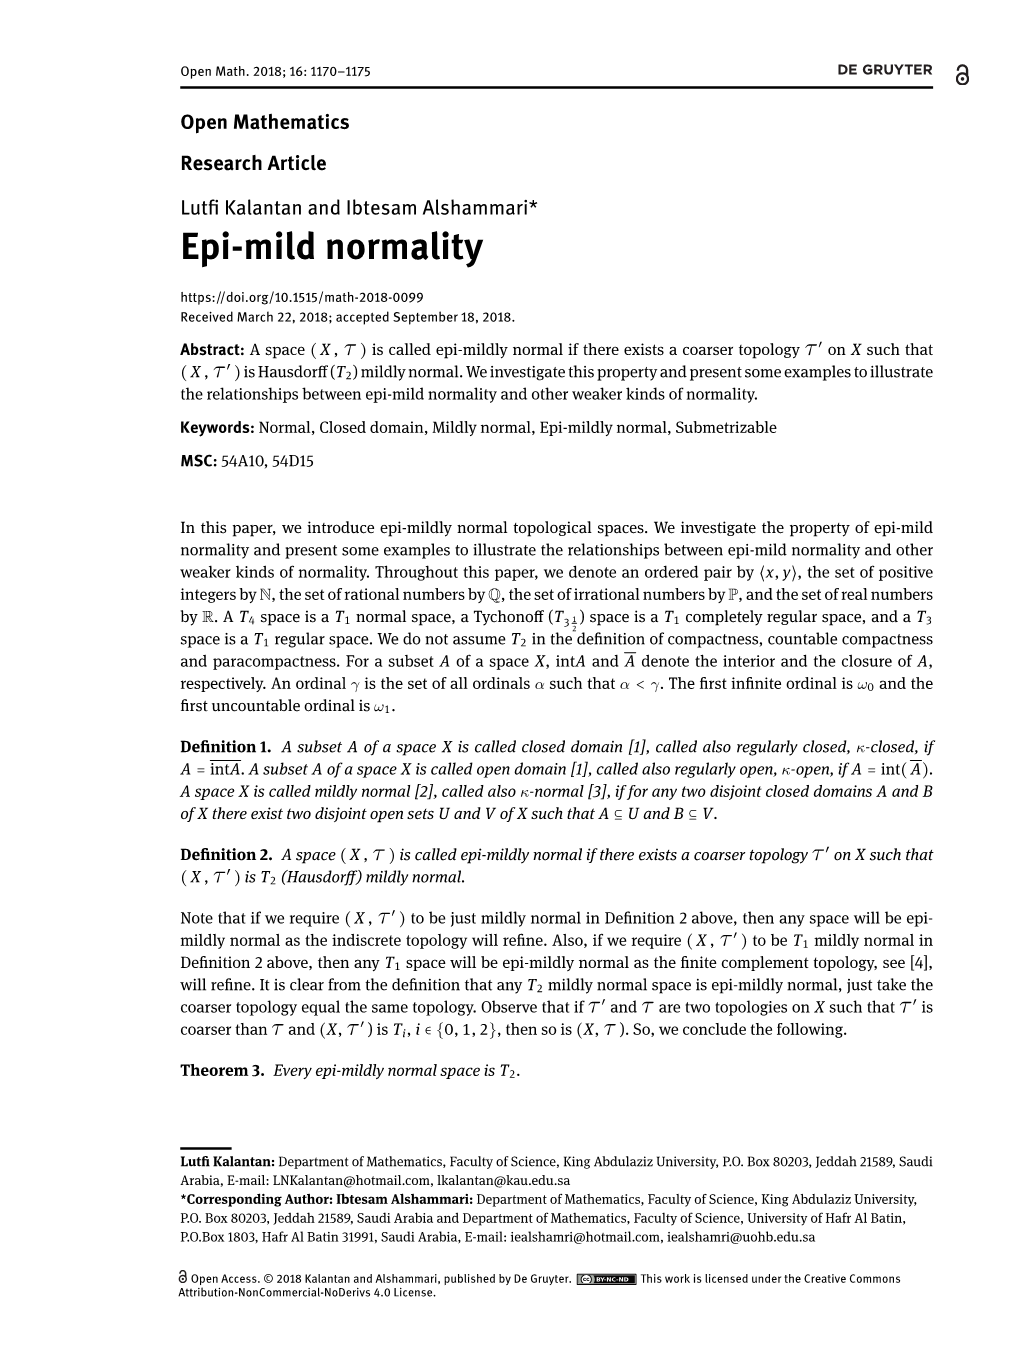 Epi-Mild Normality Received March 22, 2018; Accepted September 18, 2018